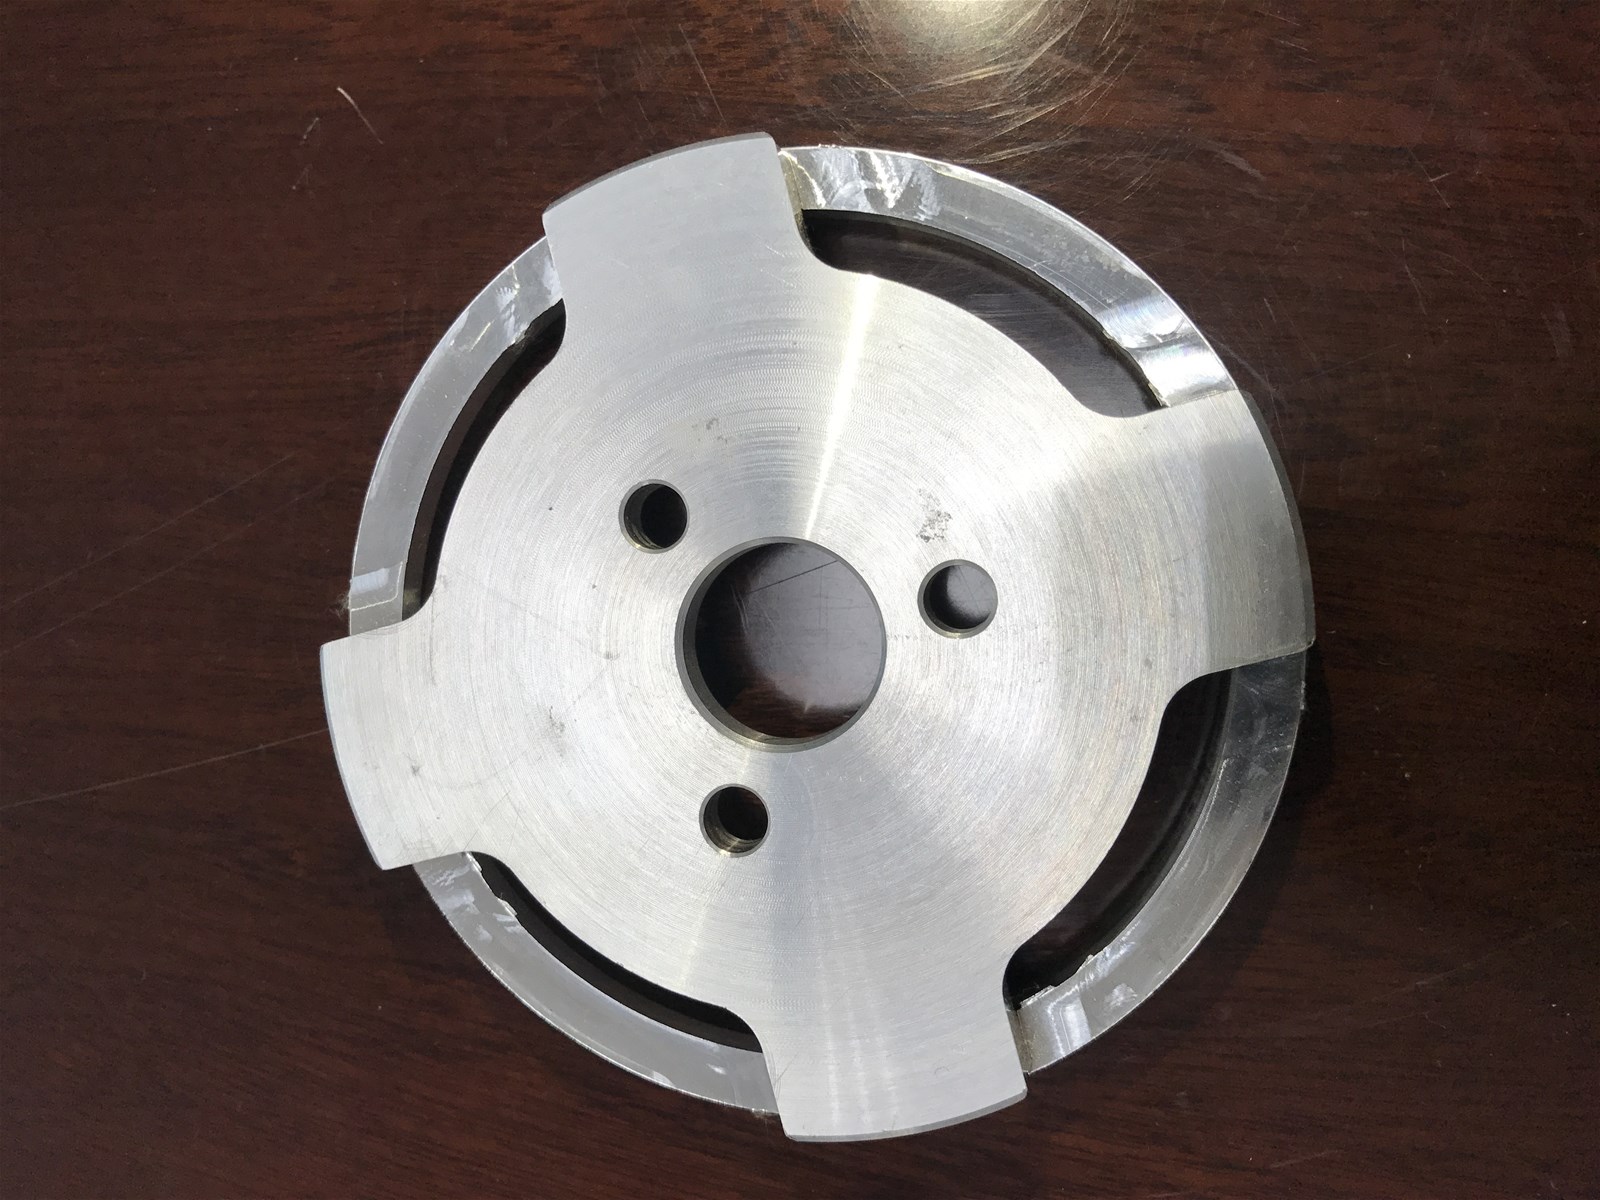 Grinding wheel for grinding knives and blades